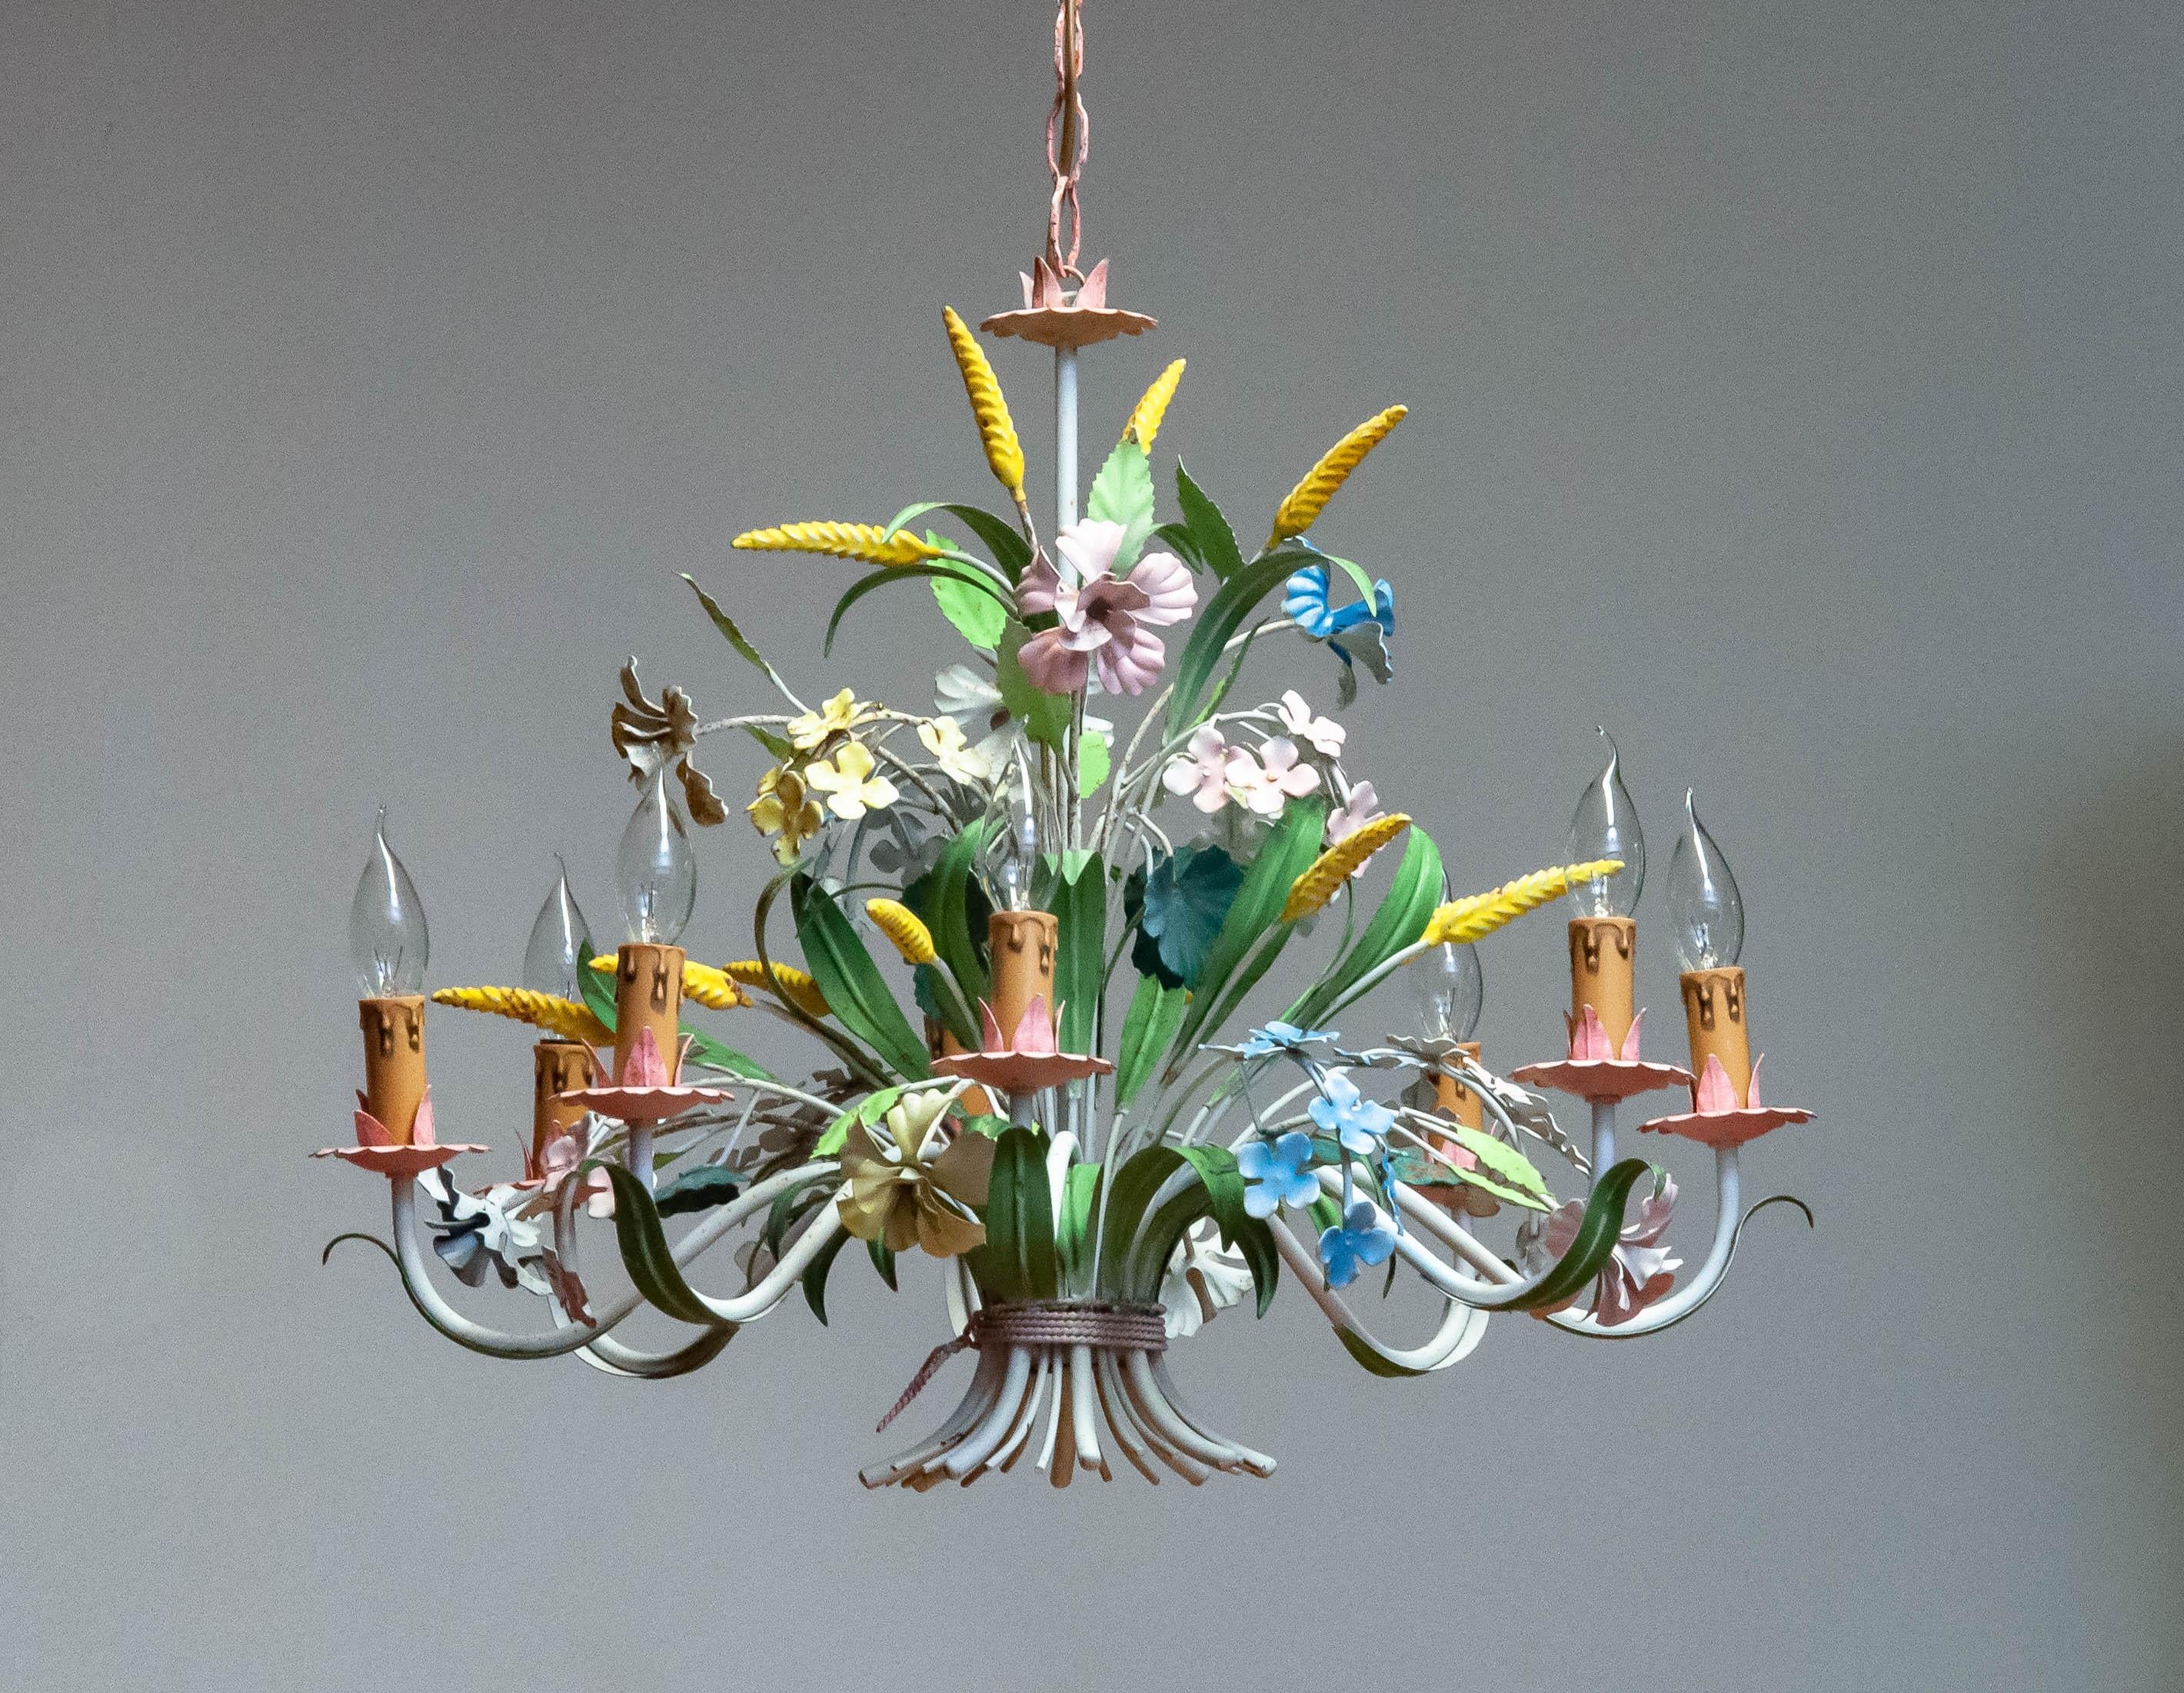 1950s Large Boho Chic Italian Tole Painted Metal Chandelier With Floral Decor 2